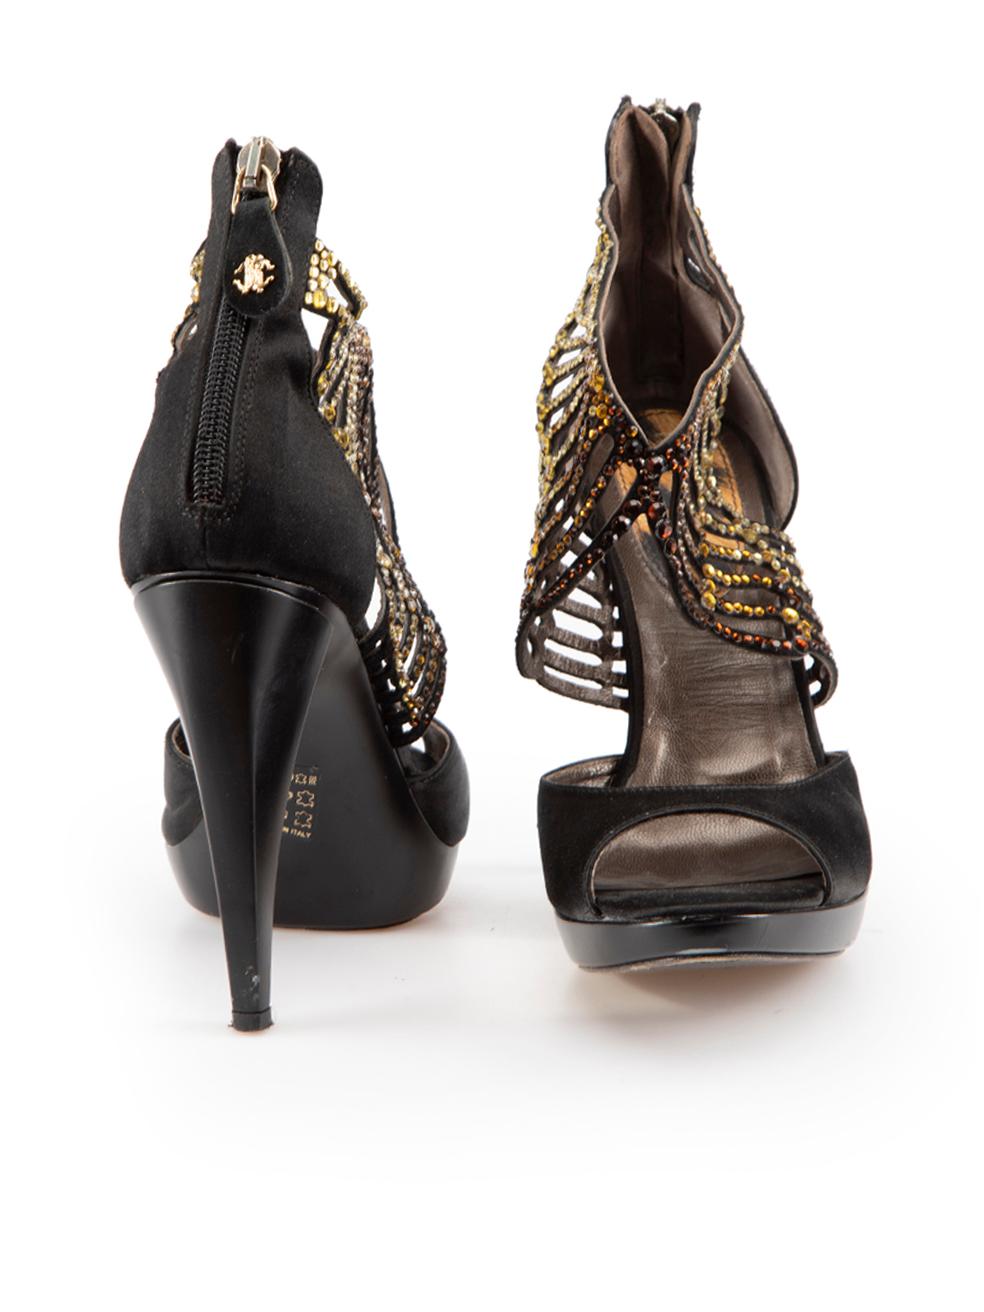 Roberto Cavalli Black Embellish Open Toe Sandals Size IT 37 In Excellent Condition For Sale In London, GB